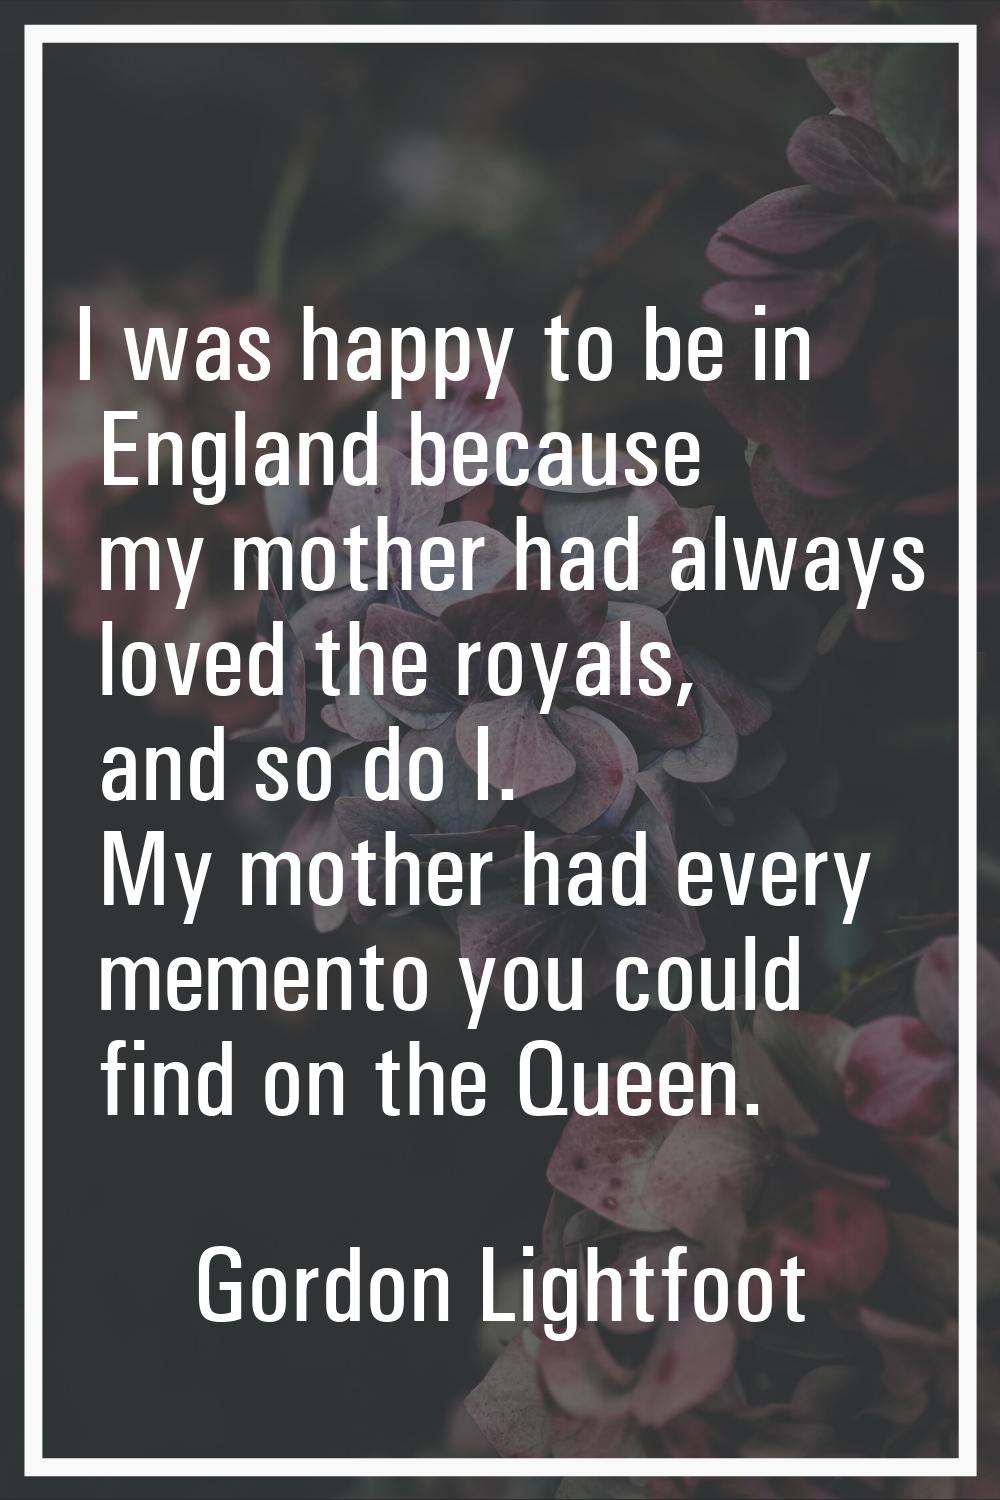 I was happy to be in England because my mother had always loved the royals, and so do I. My mother 